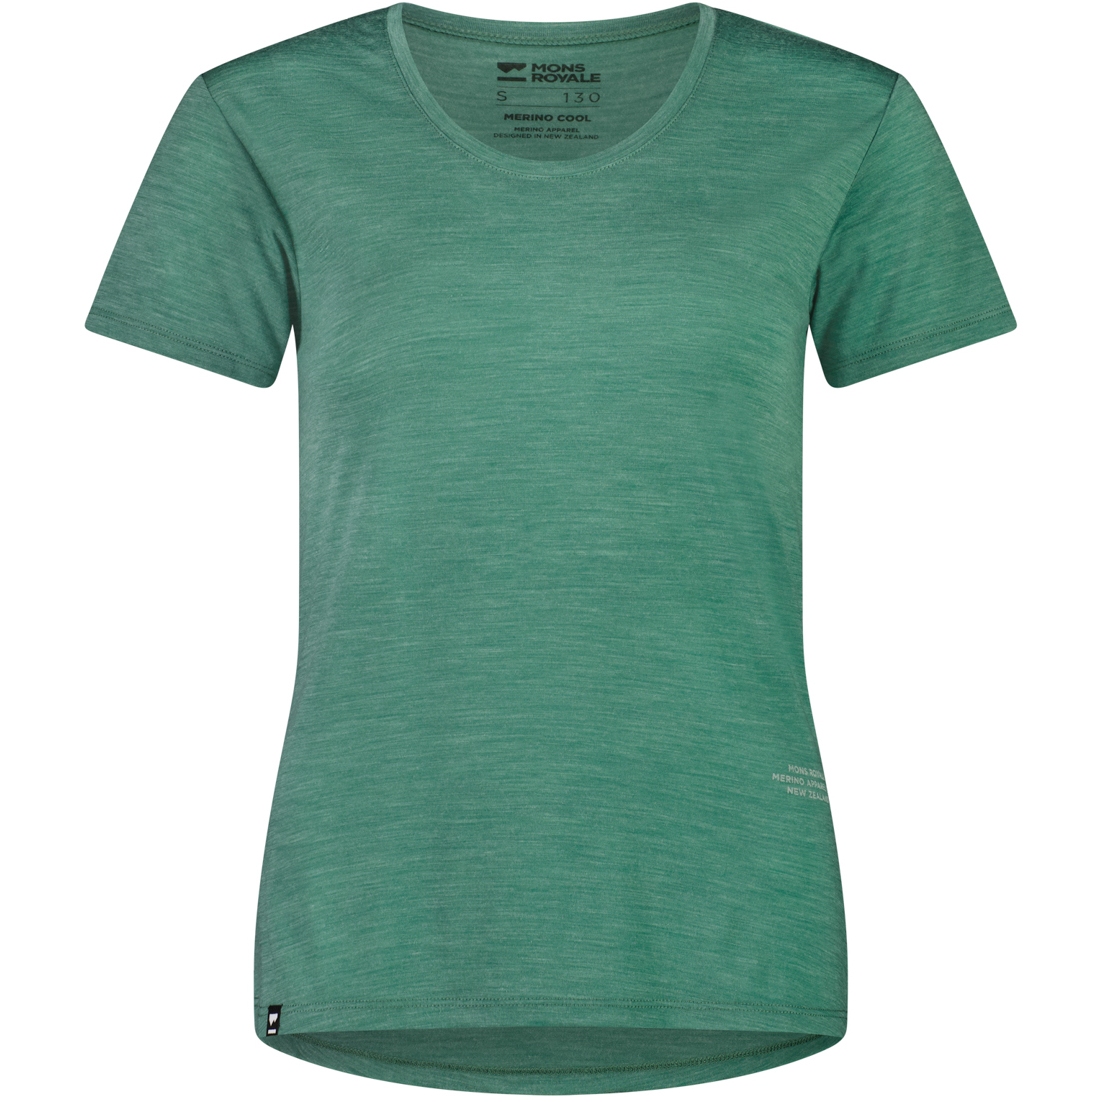 Picture of Mons Royale Zephyr Merino Cool Tee Women - smokey green